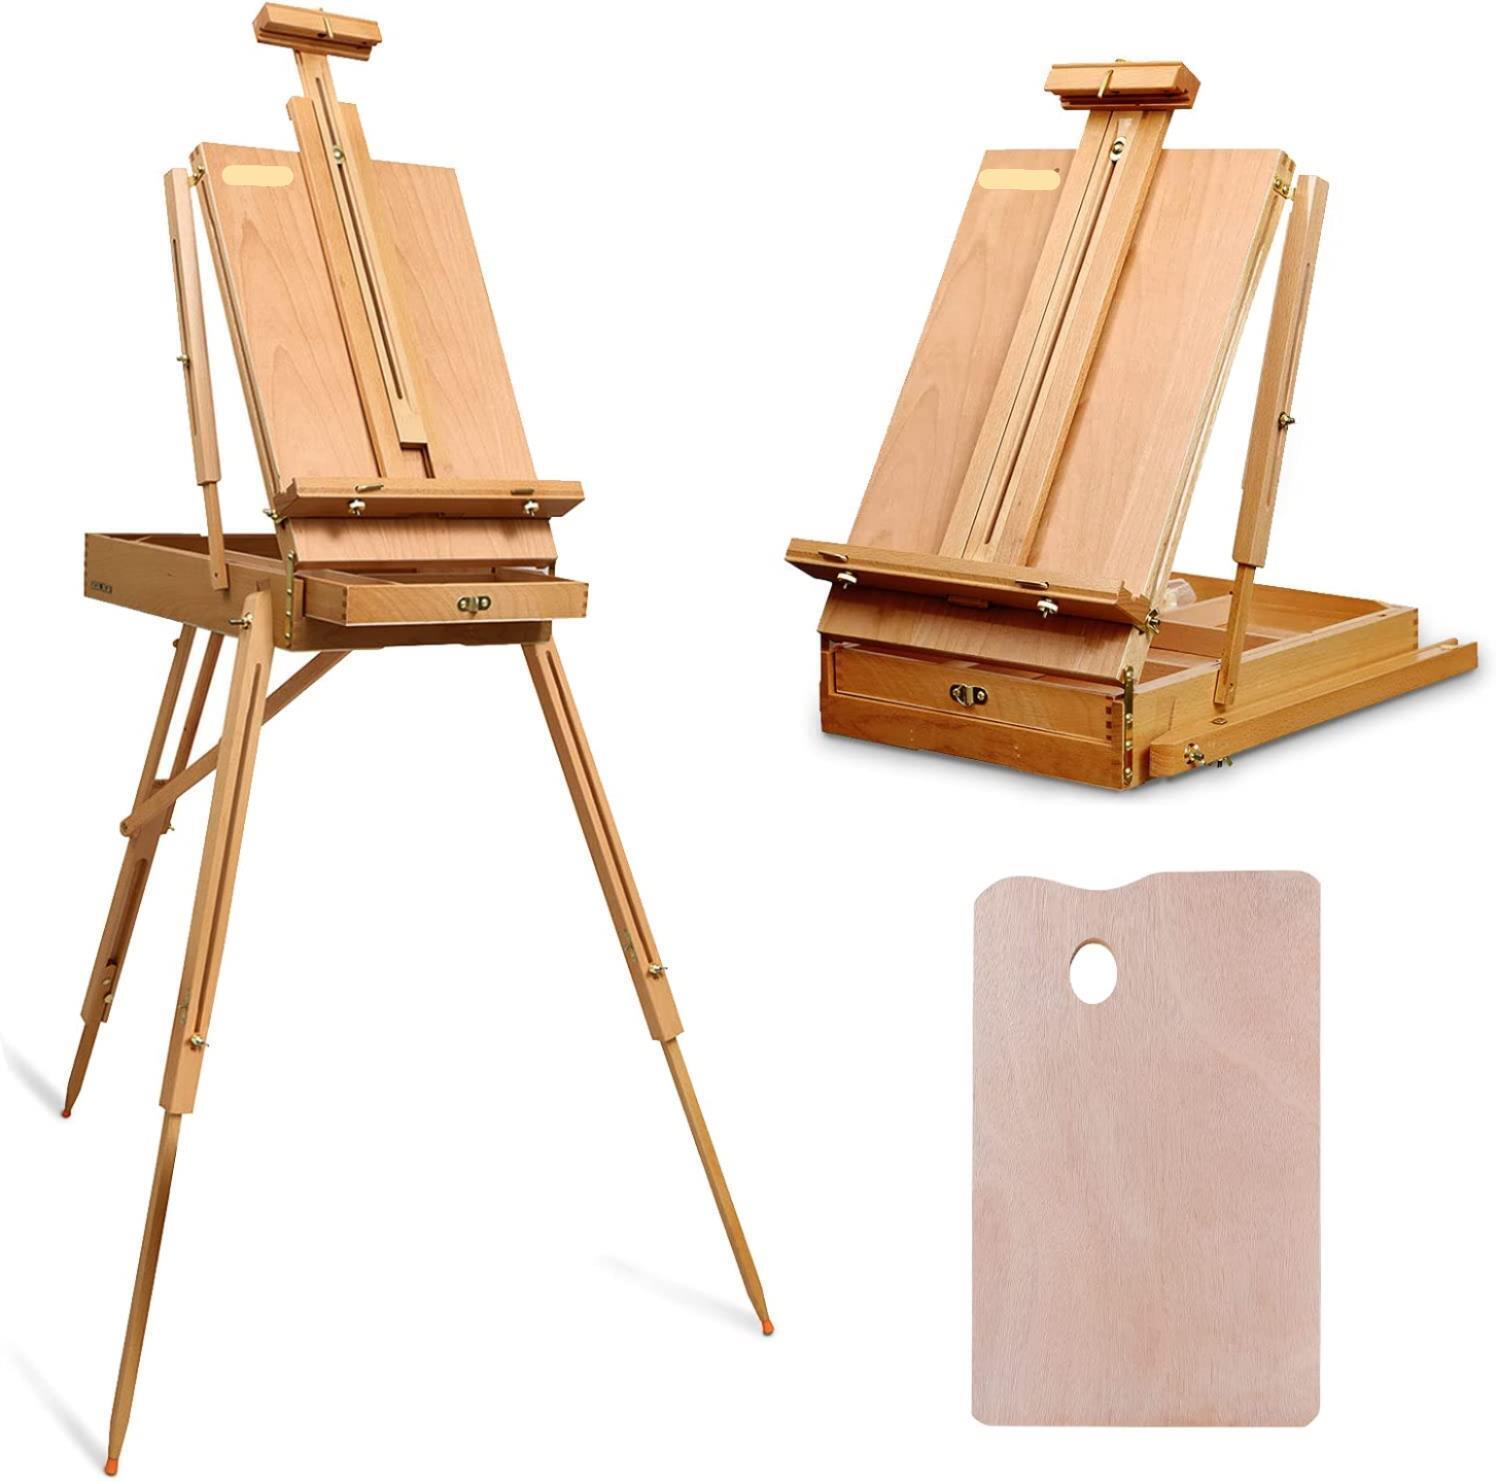 Foldable Wooden Tabletop Portable French Painting Easel Sketch Box Tripod Stand